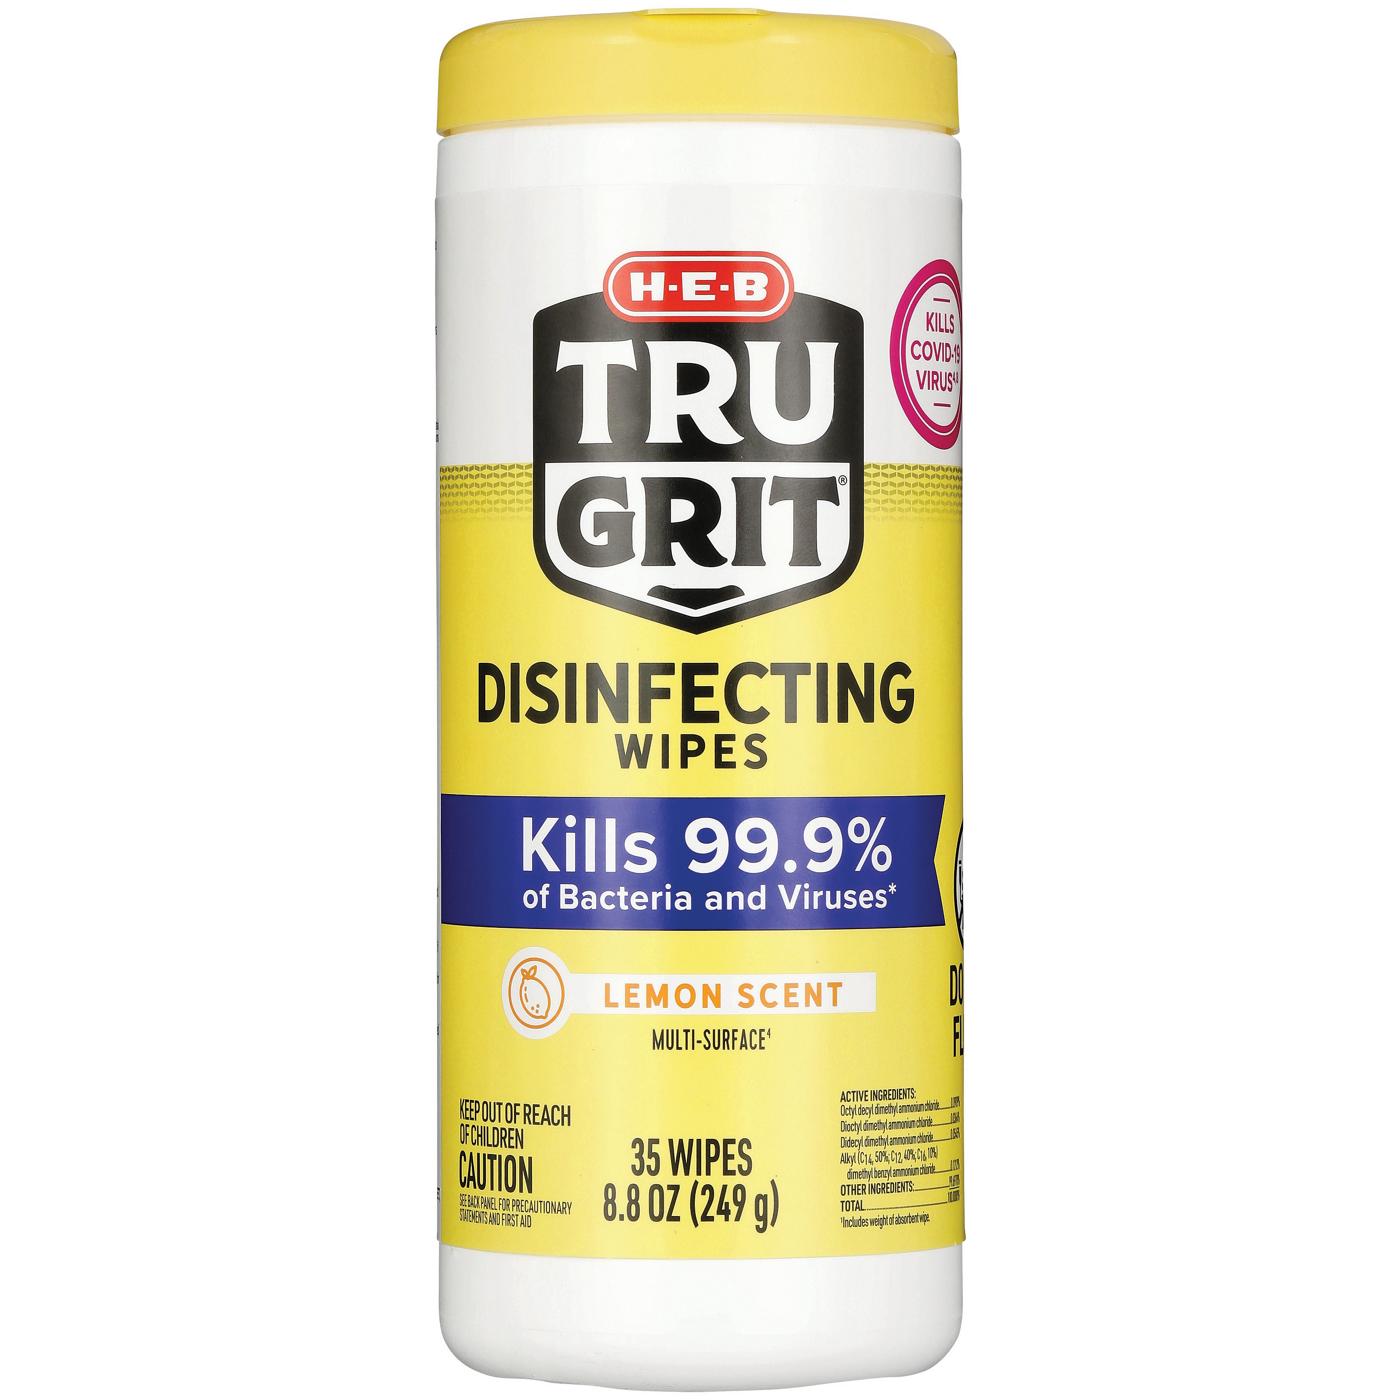 H-E-B Tru Grit Disinfecting Wipes - Lemon Scent; image 1 of 2